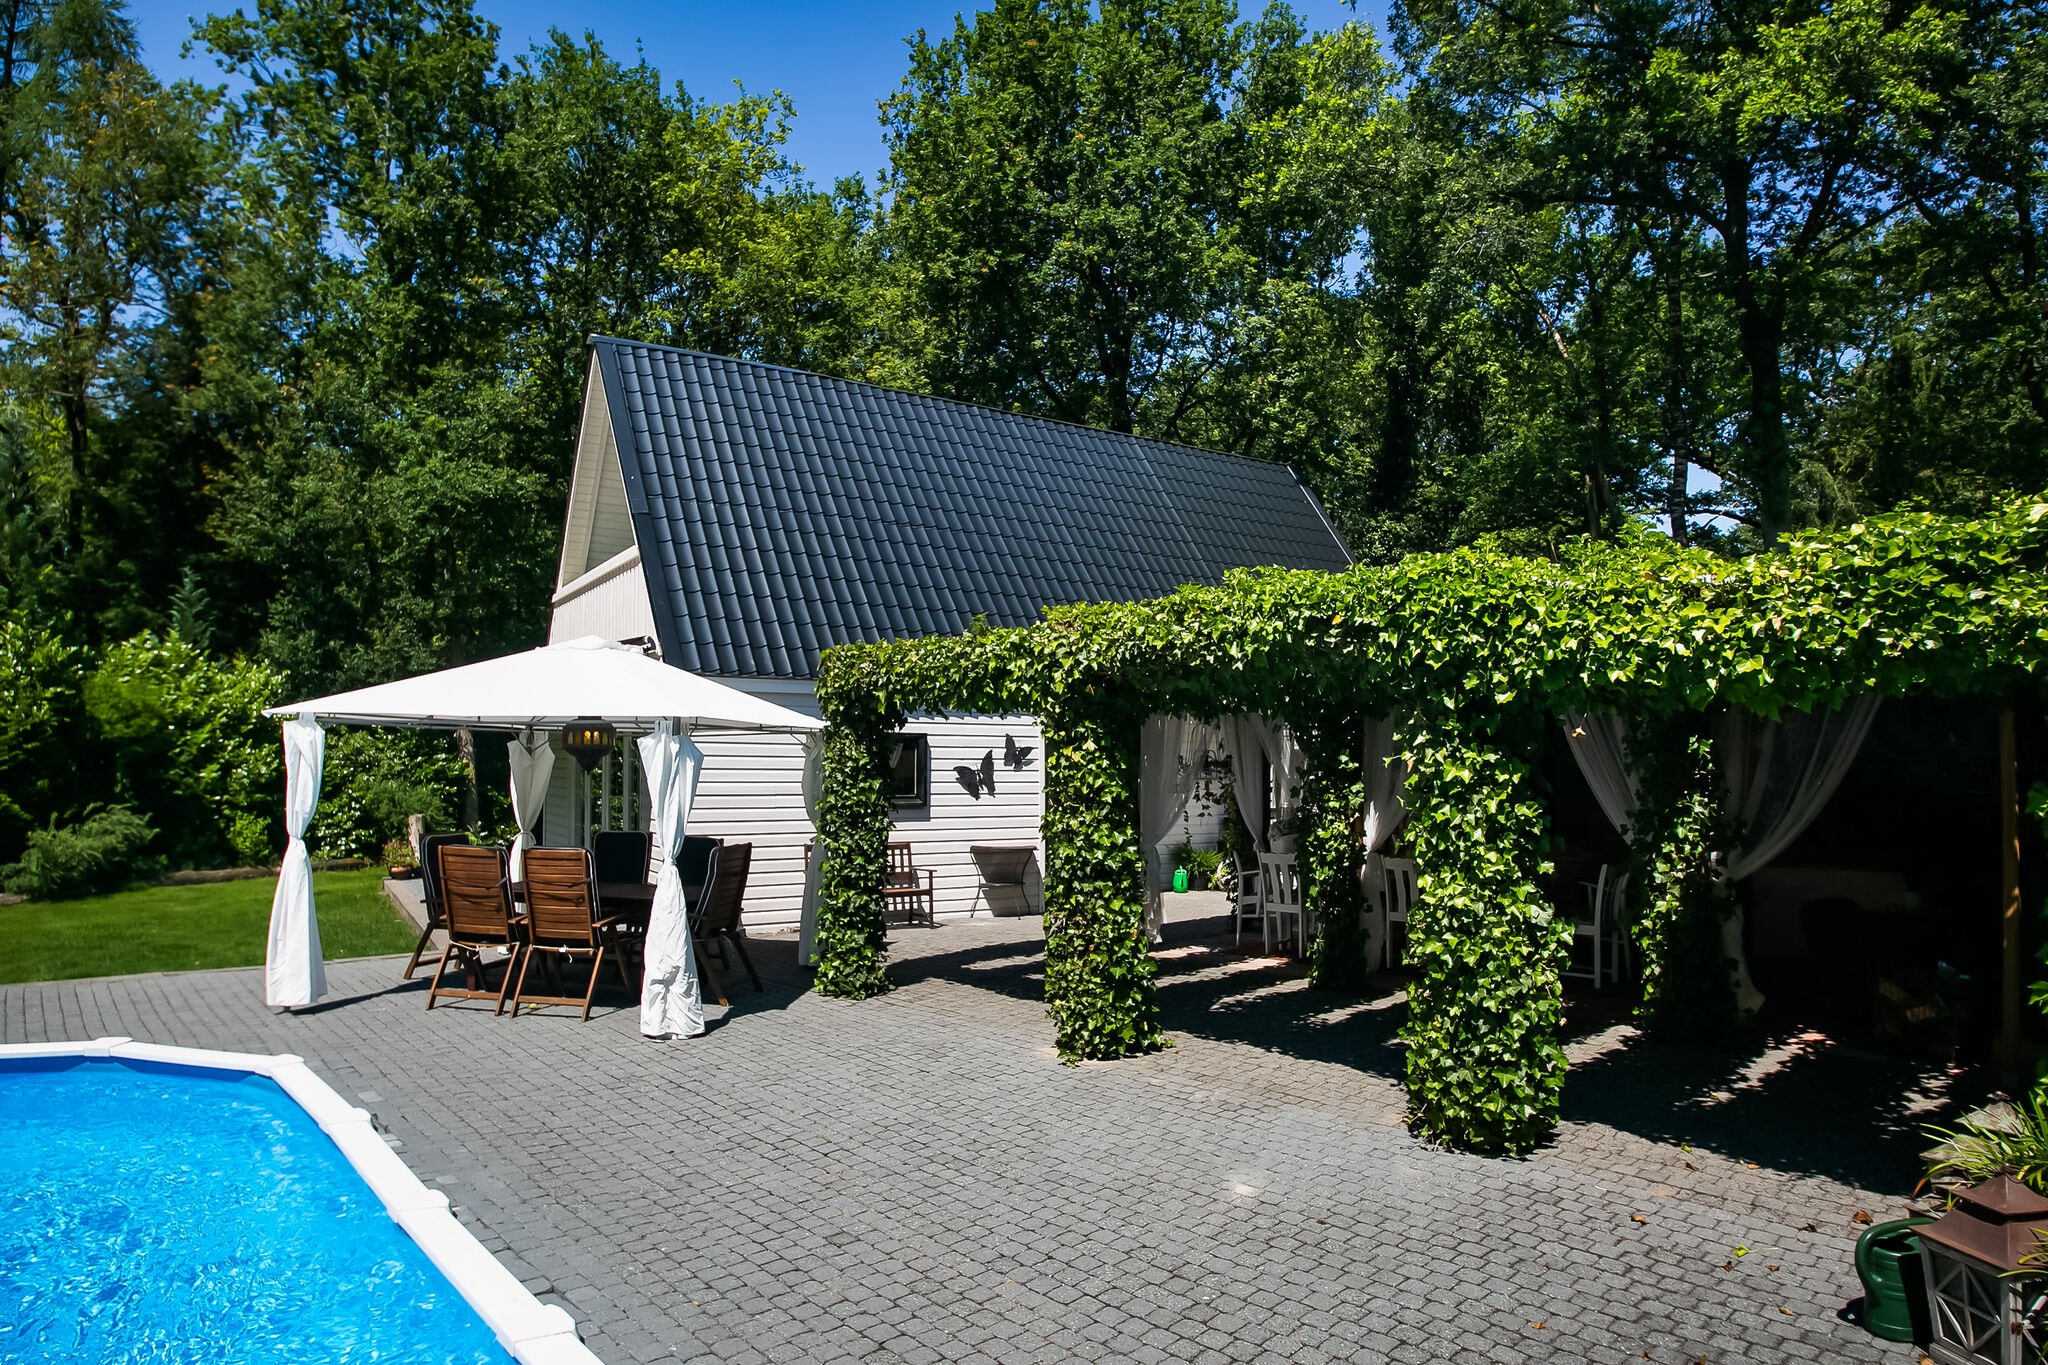 Villa in Wateren with covered terrace